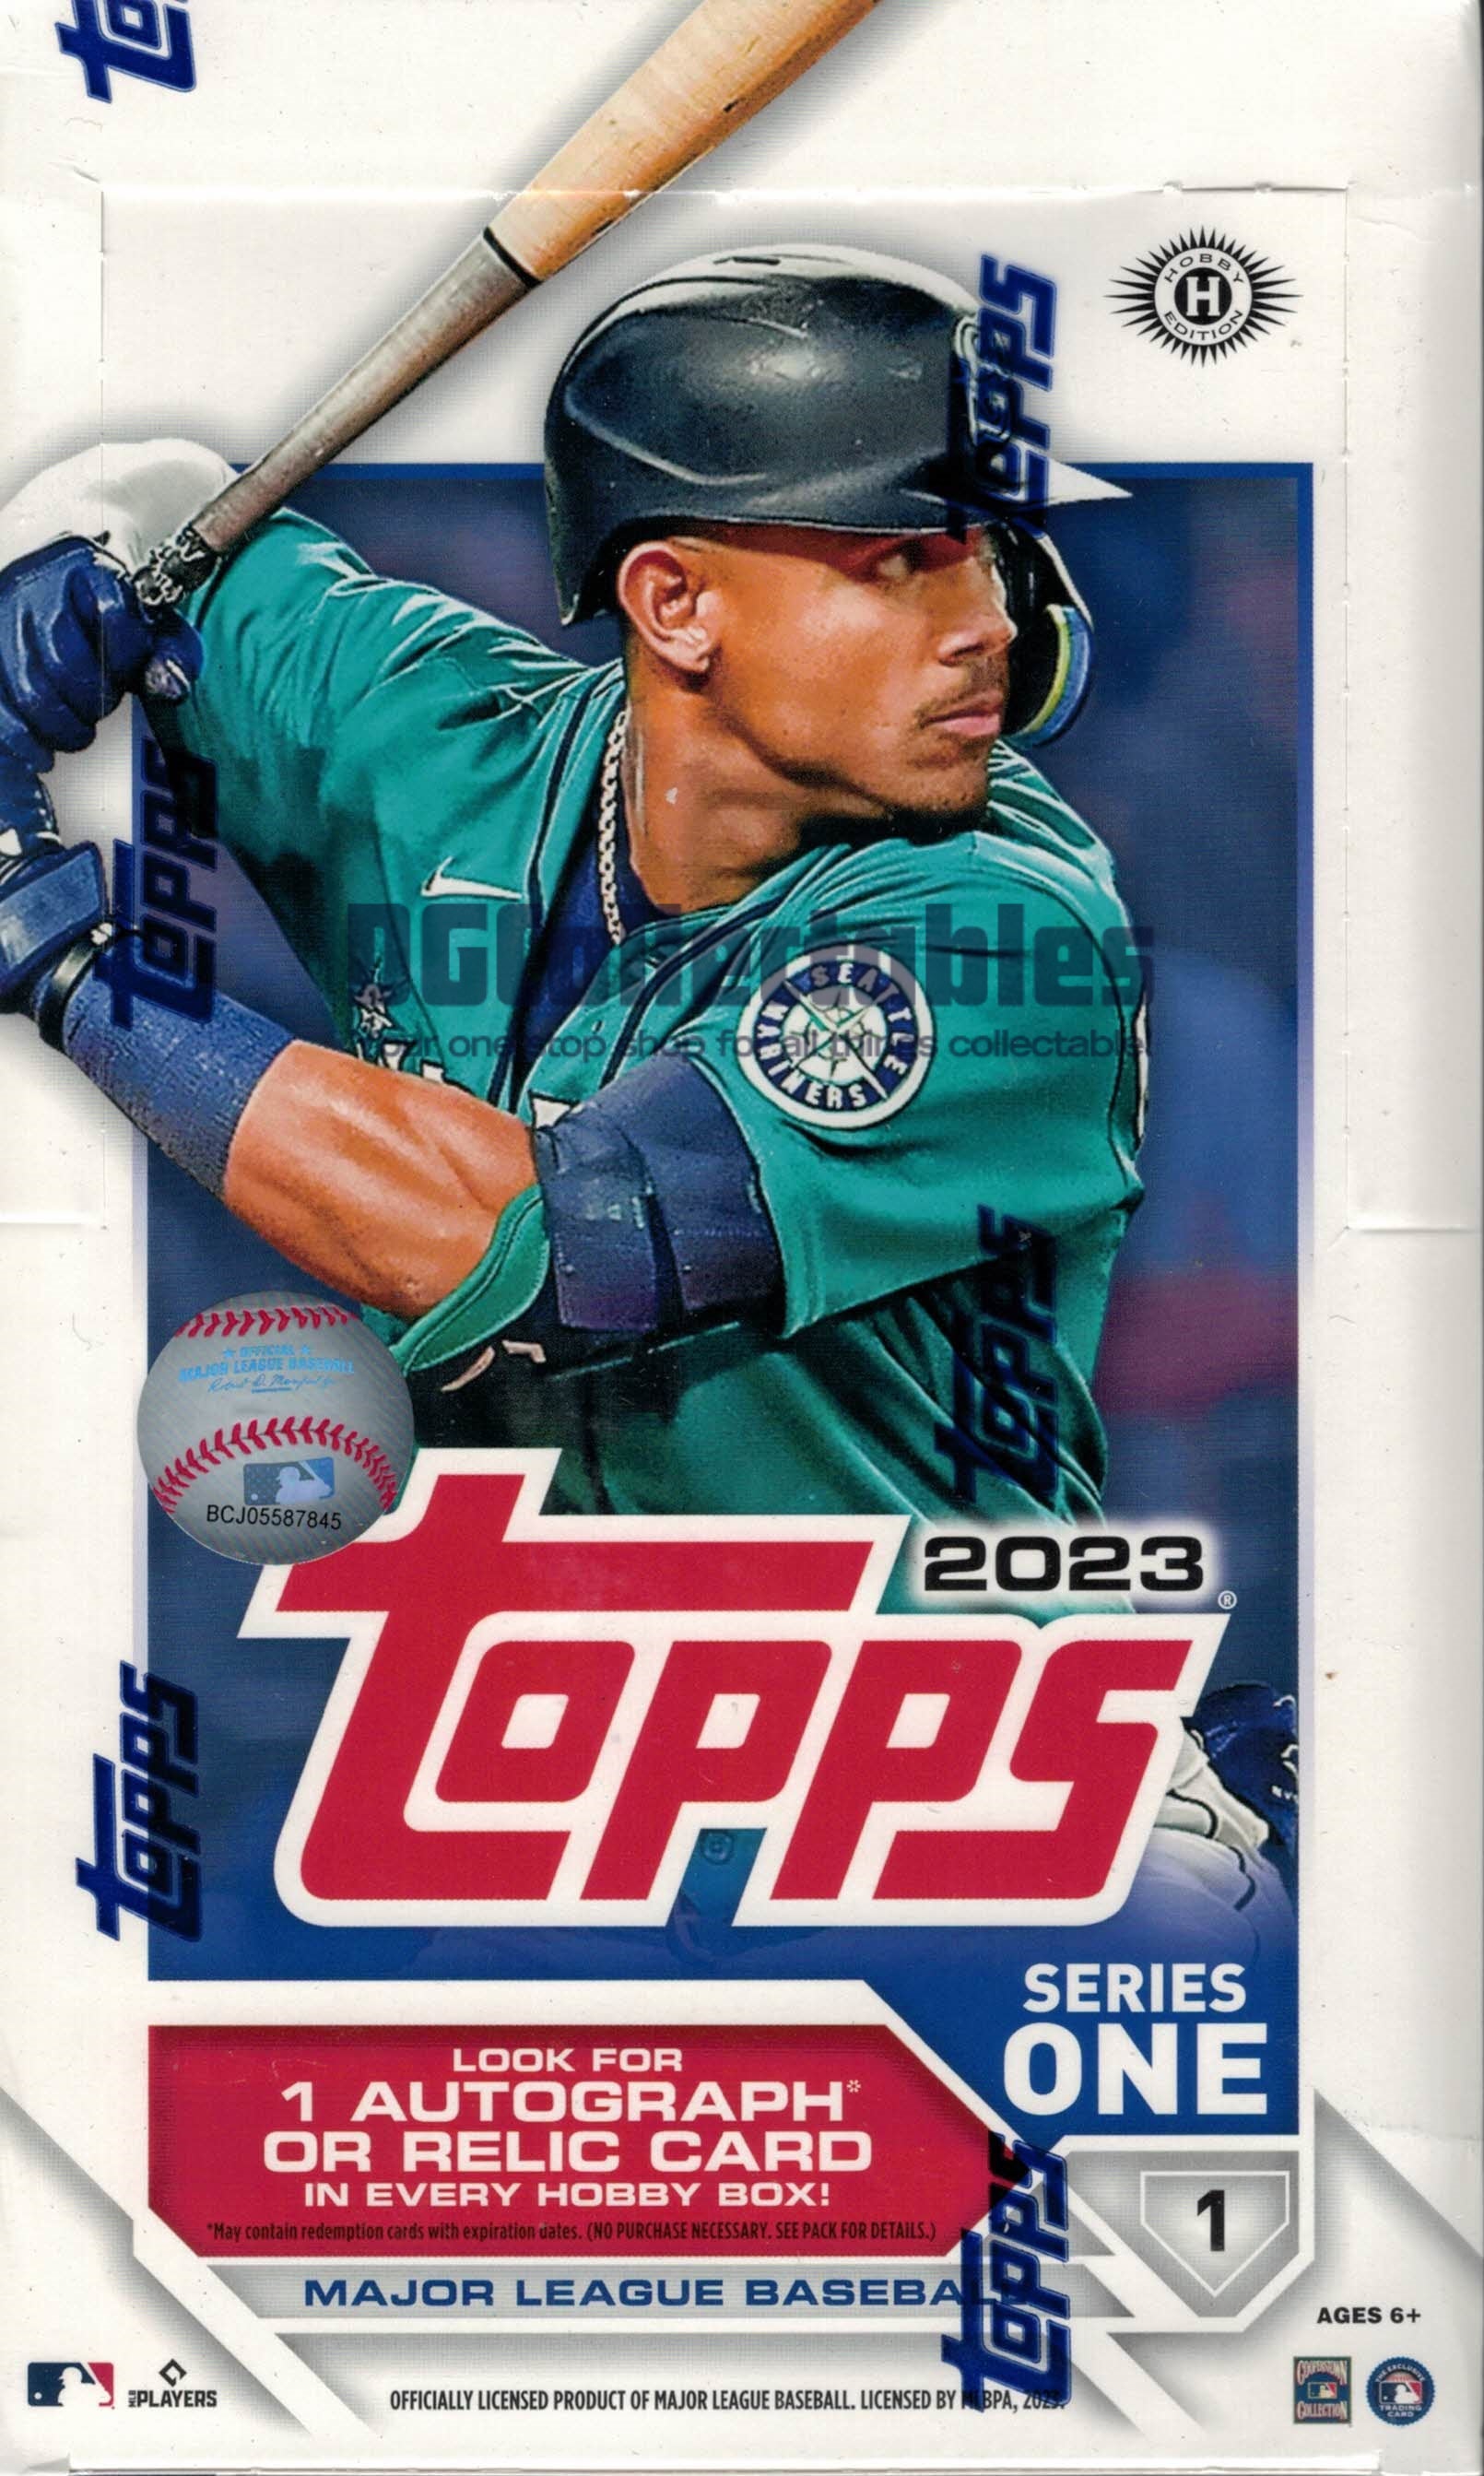 New 2023 Topps Series One a hit with baseball card collectors - Sports  Collectors Digest